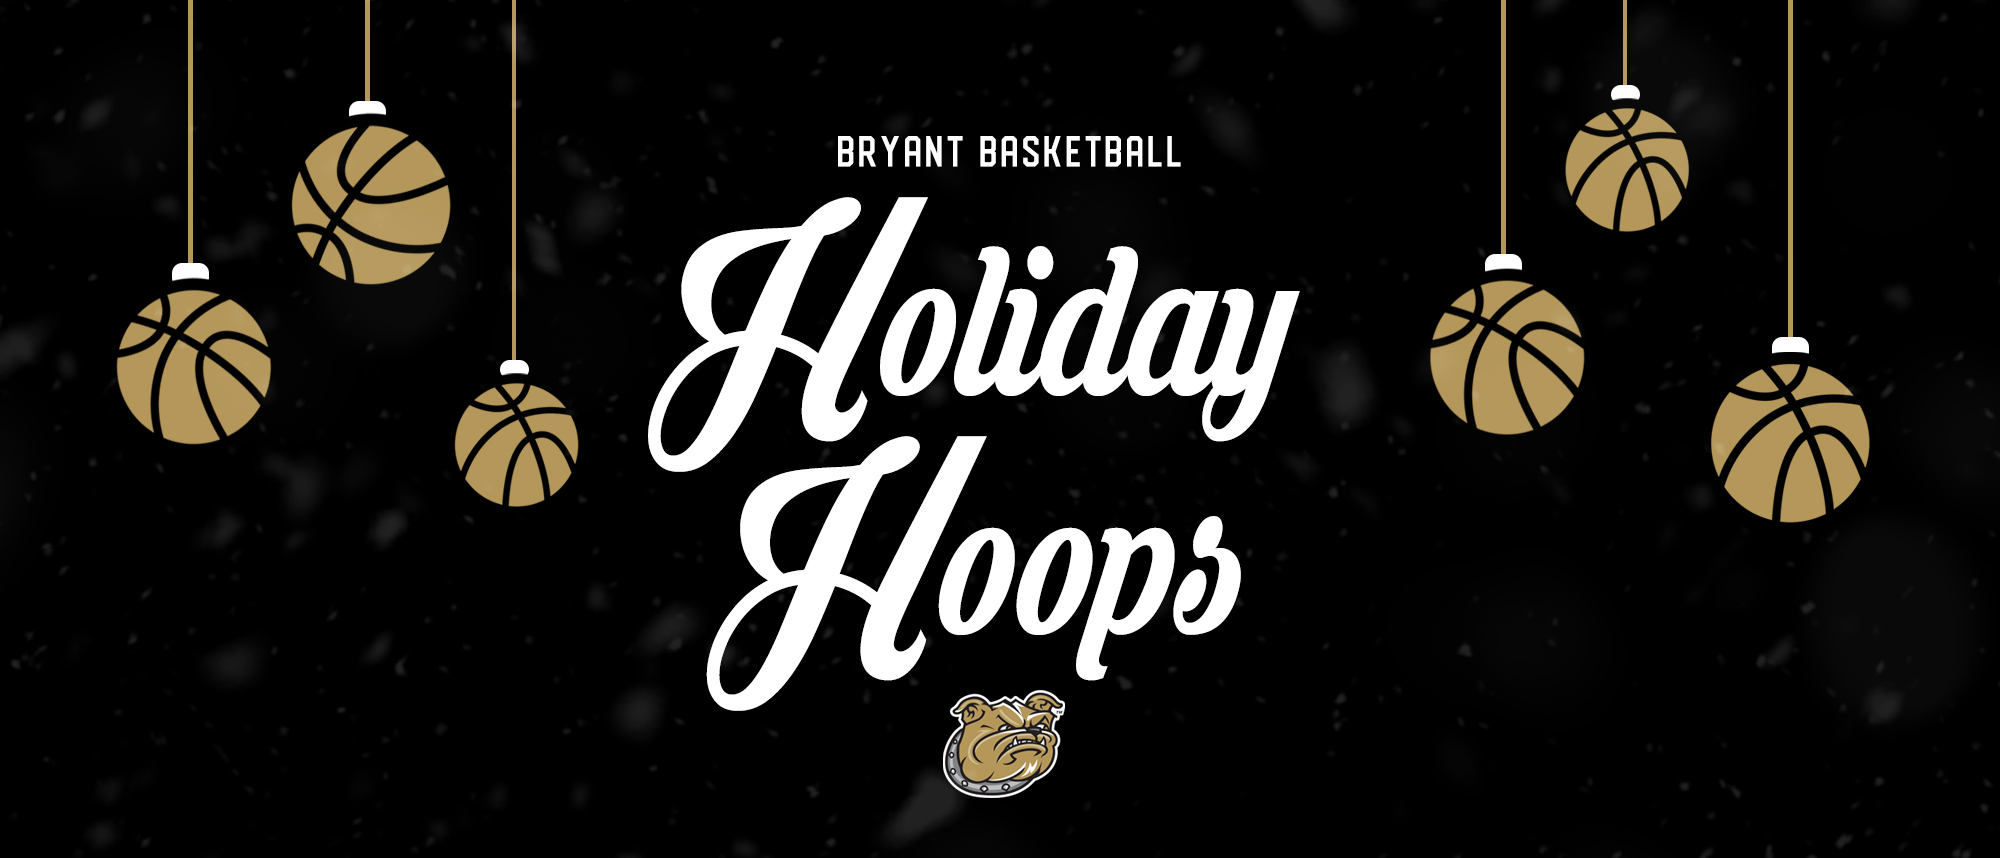 Holiday Hoops ticket pricing returns for 2018-19